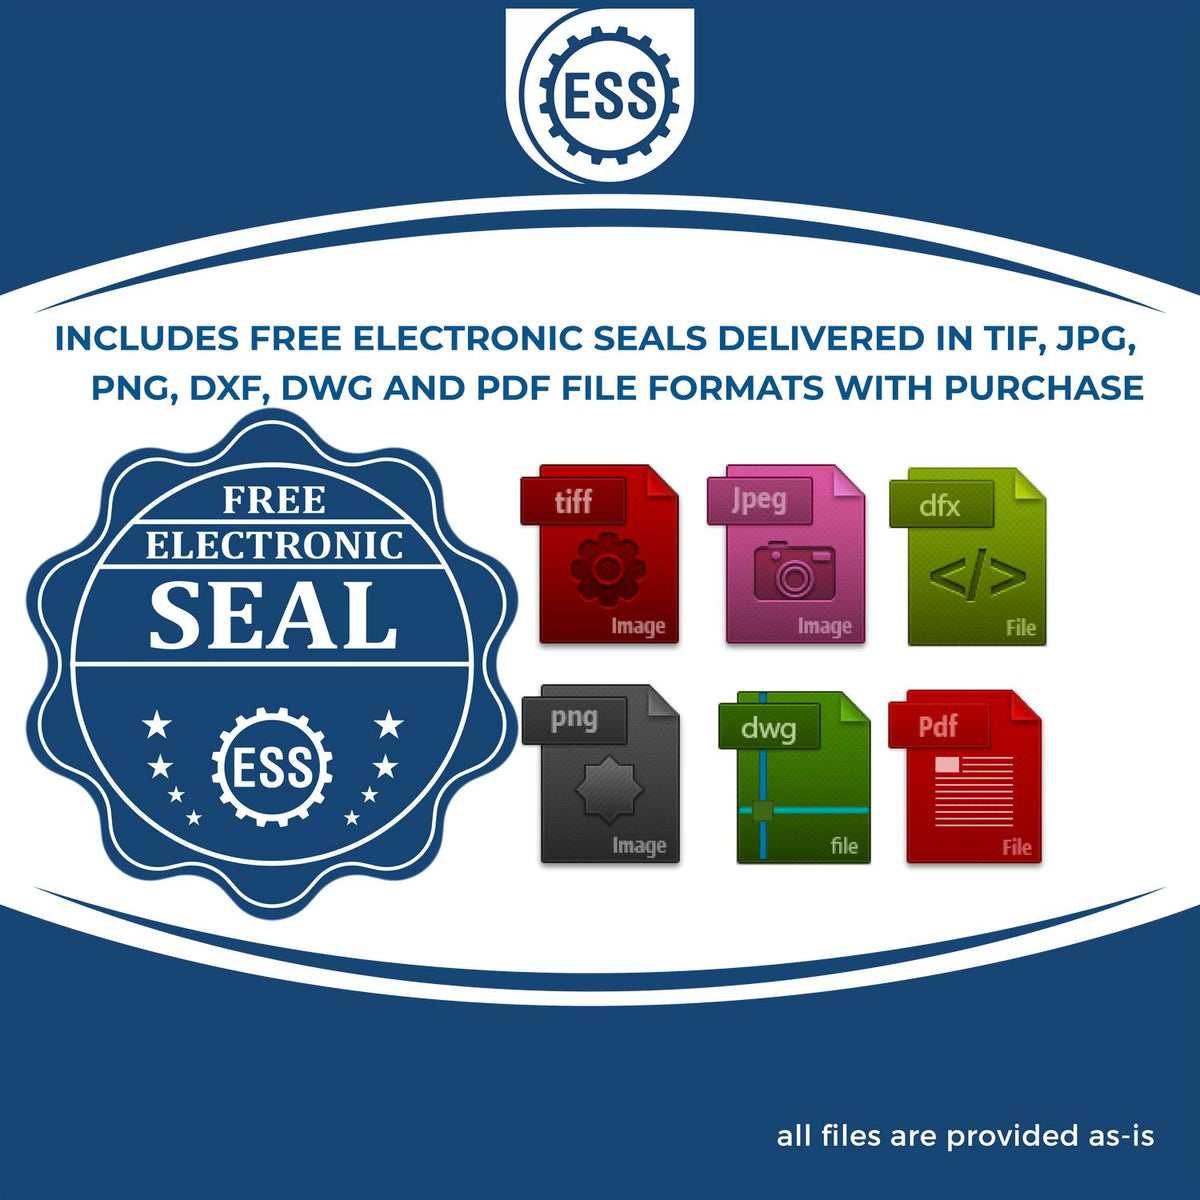 An infographic for the free electronic seal for the Slim Pre-Inked Utah Landscape Architect Seal Stamp illustrating the different file type icons such as DXF, DWG, TIF, JPG and PNG.